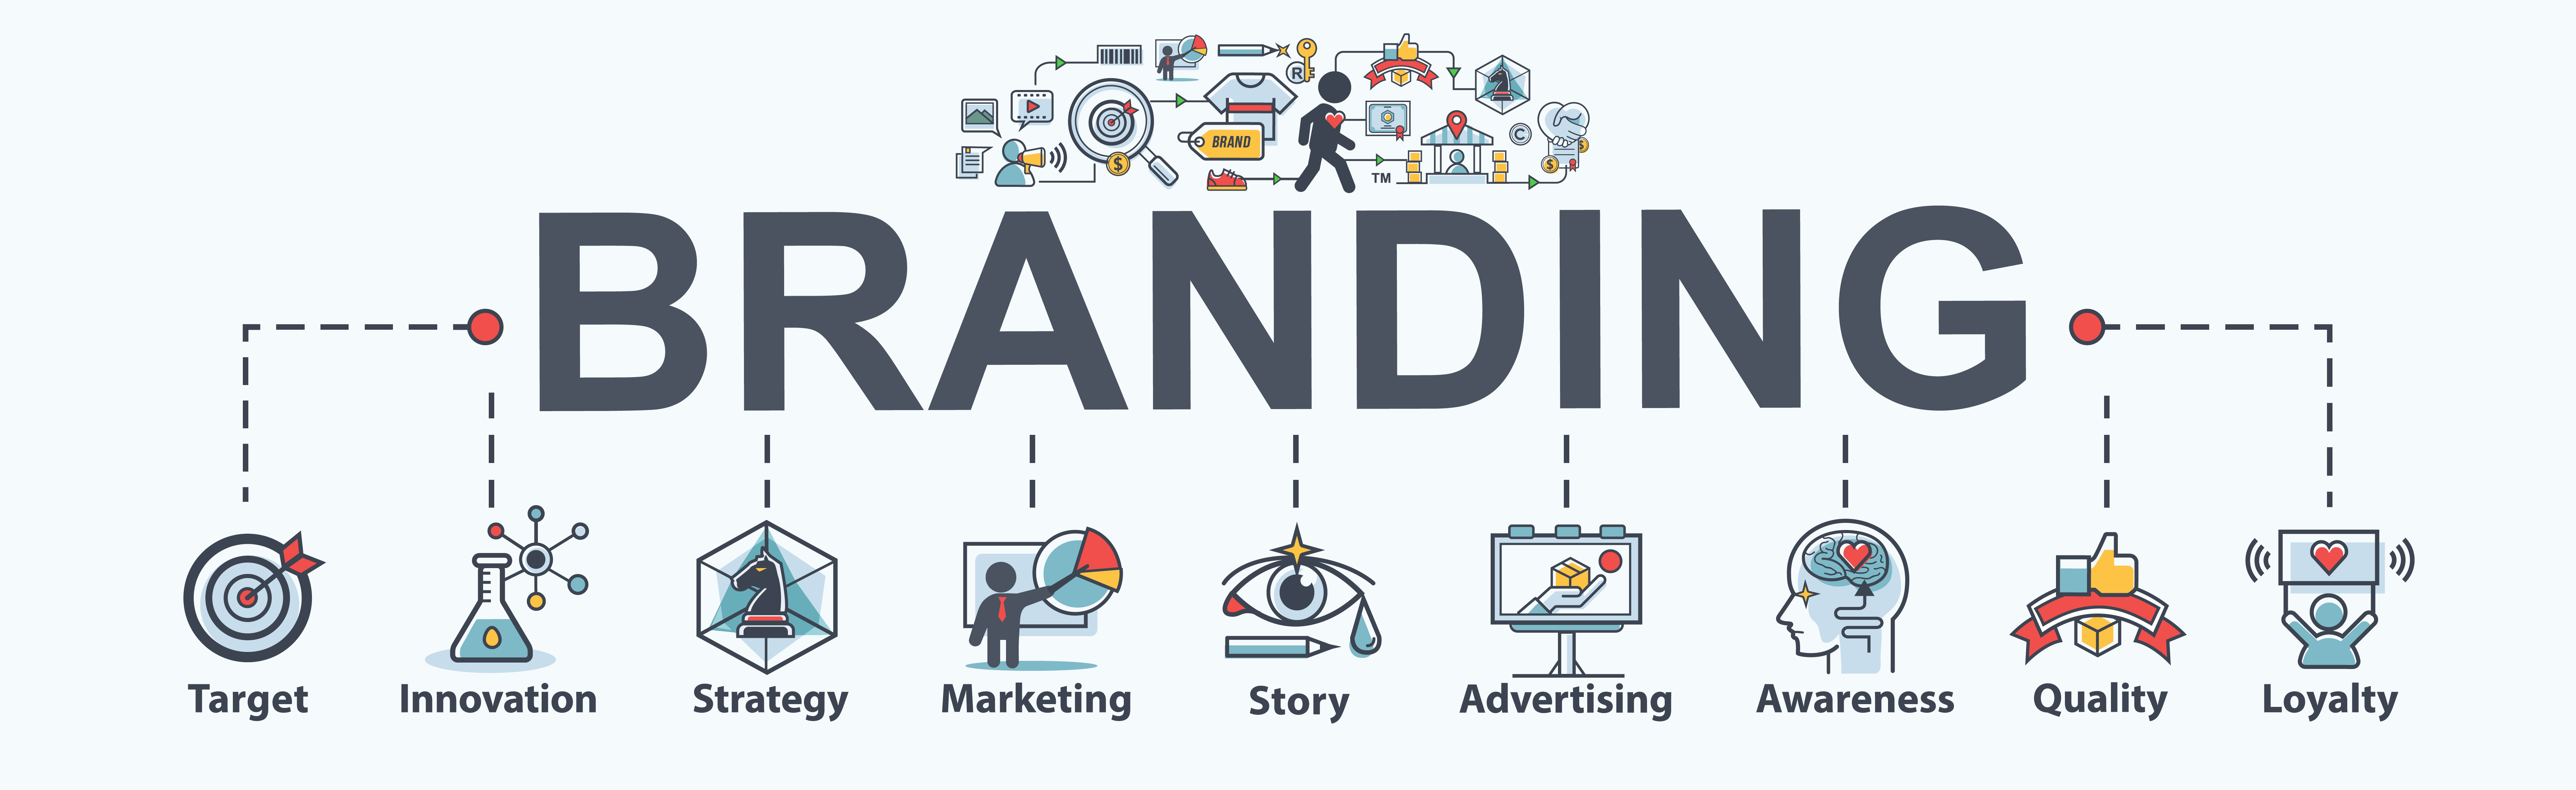 what is the brand presentation